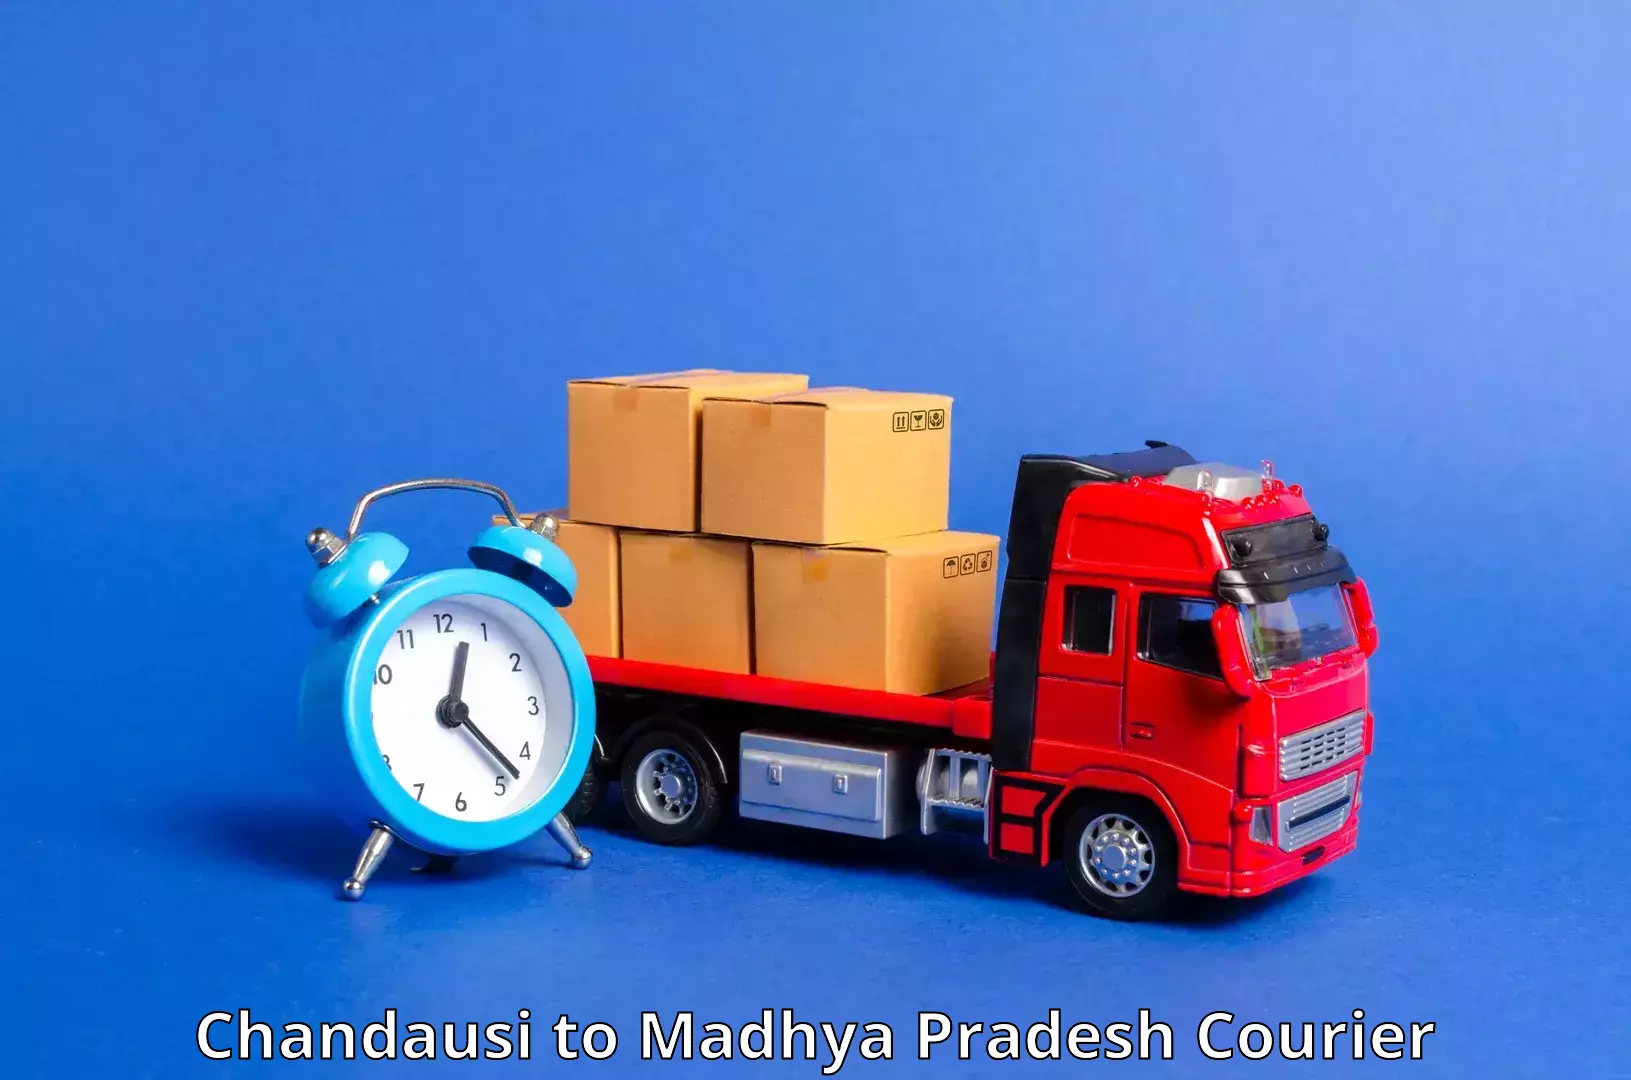 Reliable courier service Chandausi to Ratlam